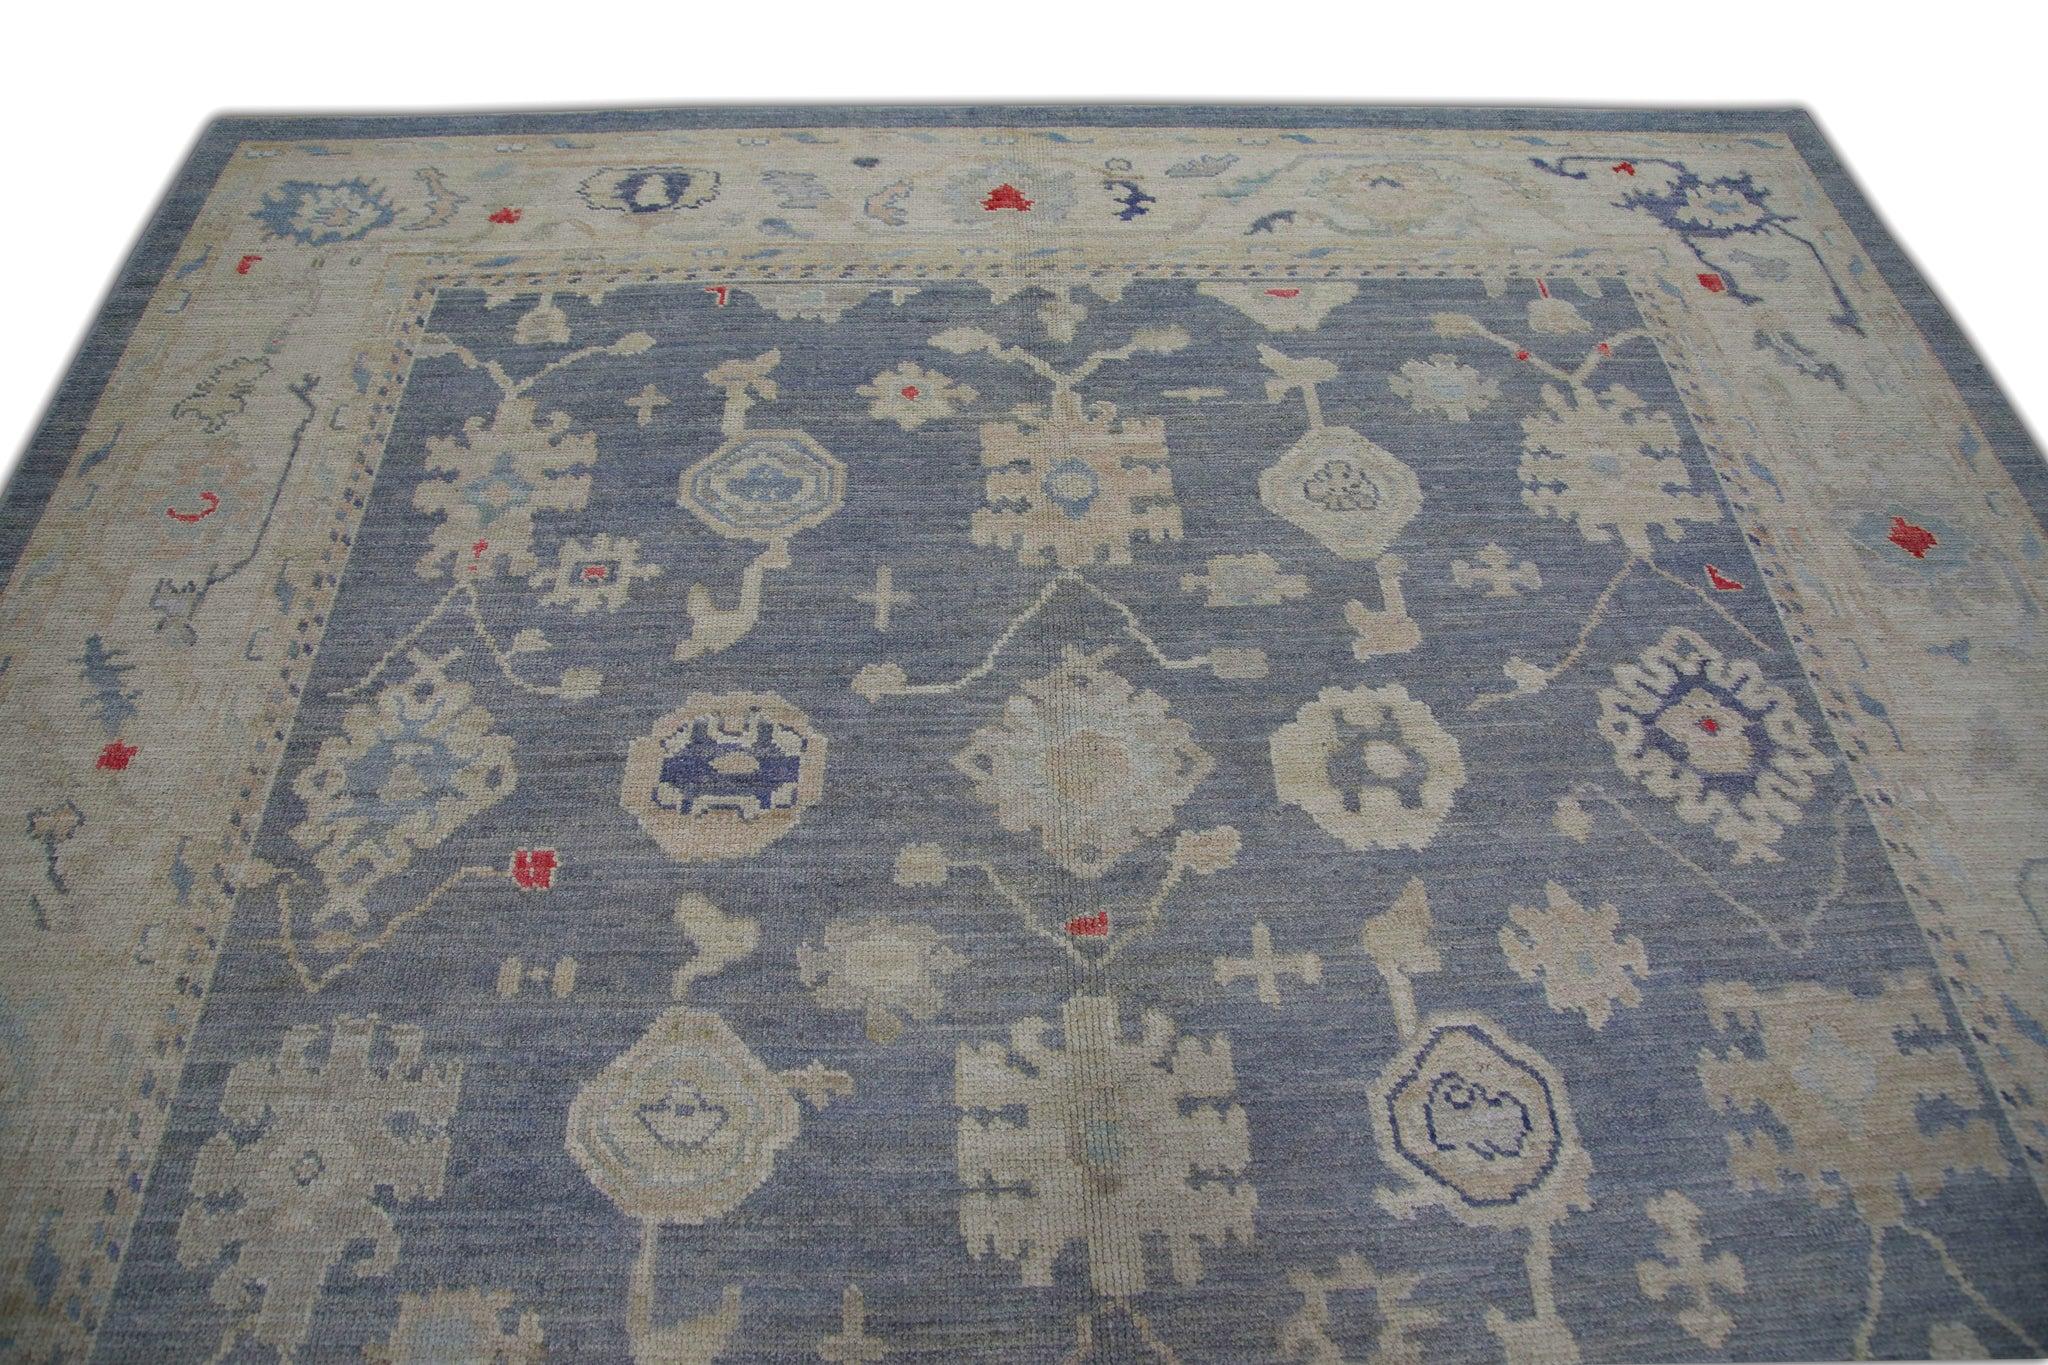 Vegetable Dyed Handwoven Wool Floral Turkish Oushak Rug in Blue, Red, and Cream 8'4